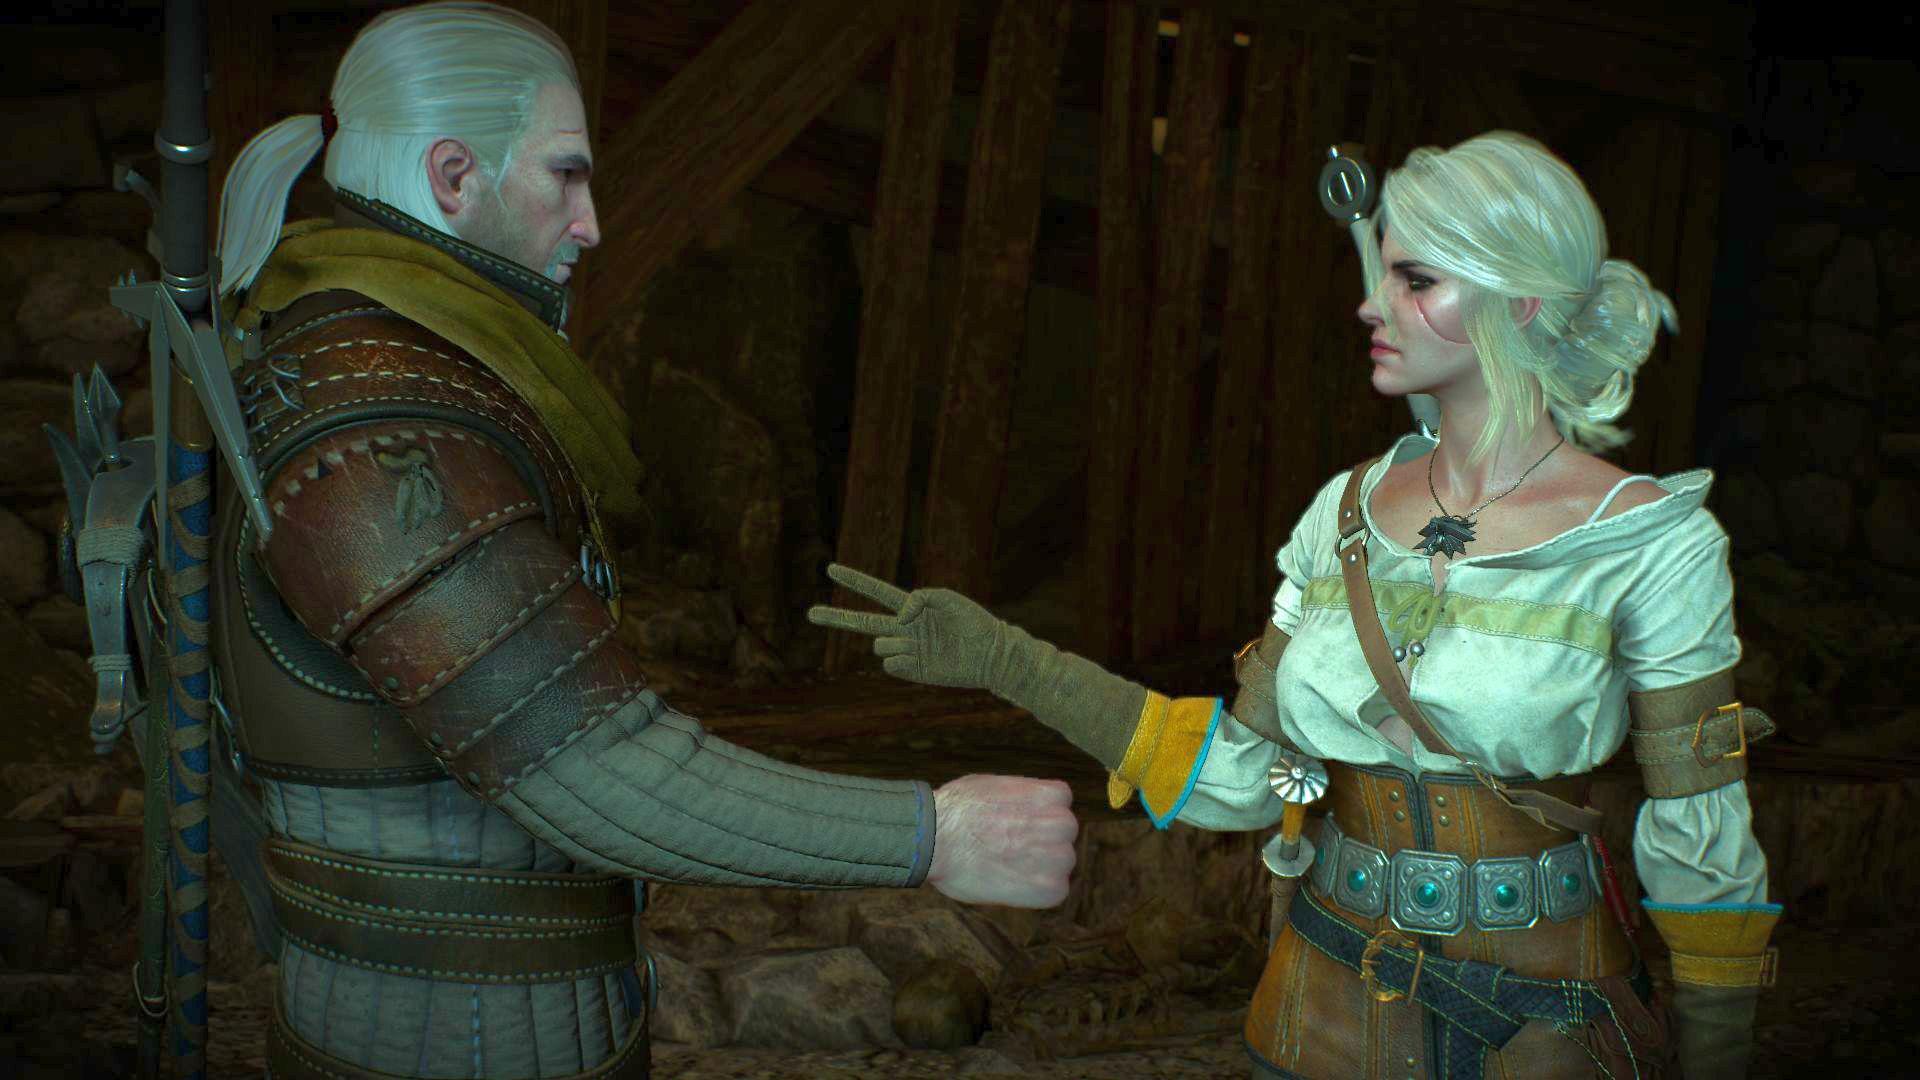 The Witcher 3 Boss Guide: The Crones